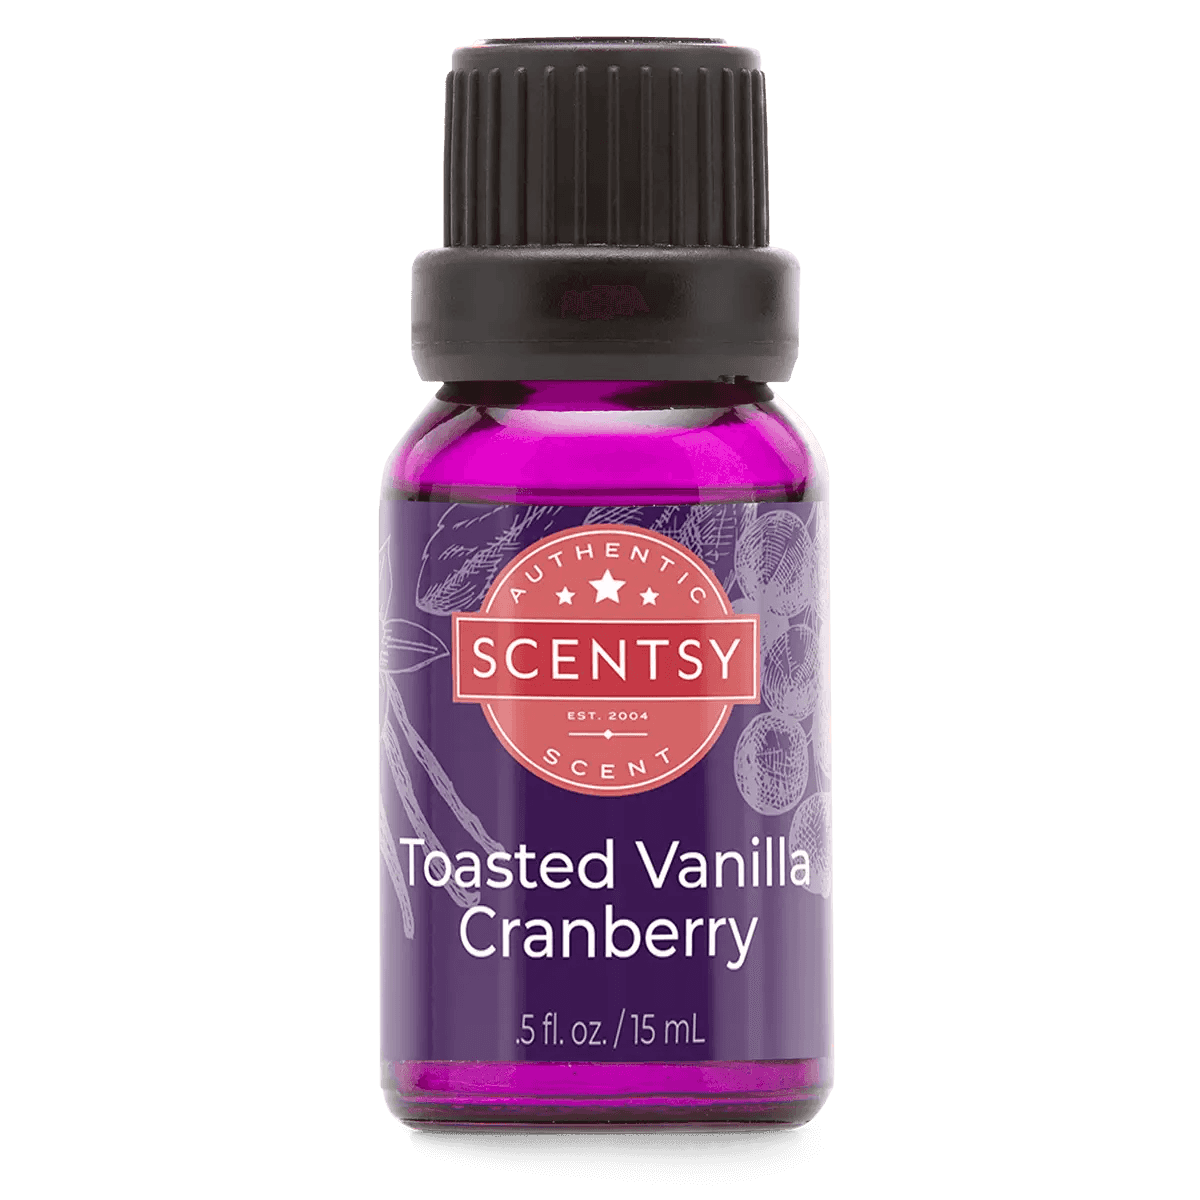 Toasted Vanilla Cranberry Natural Oil Blend